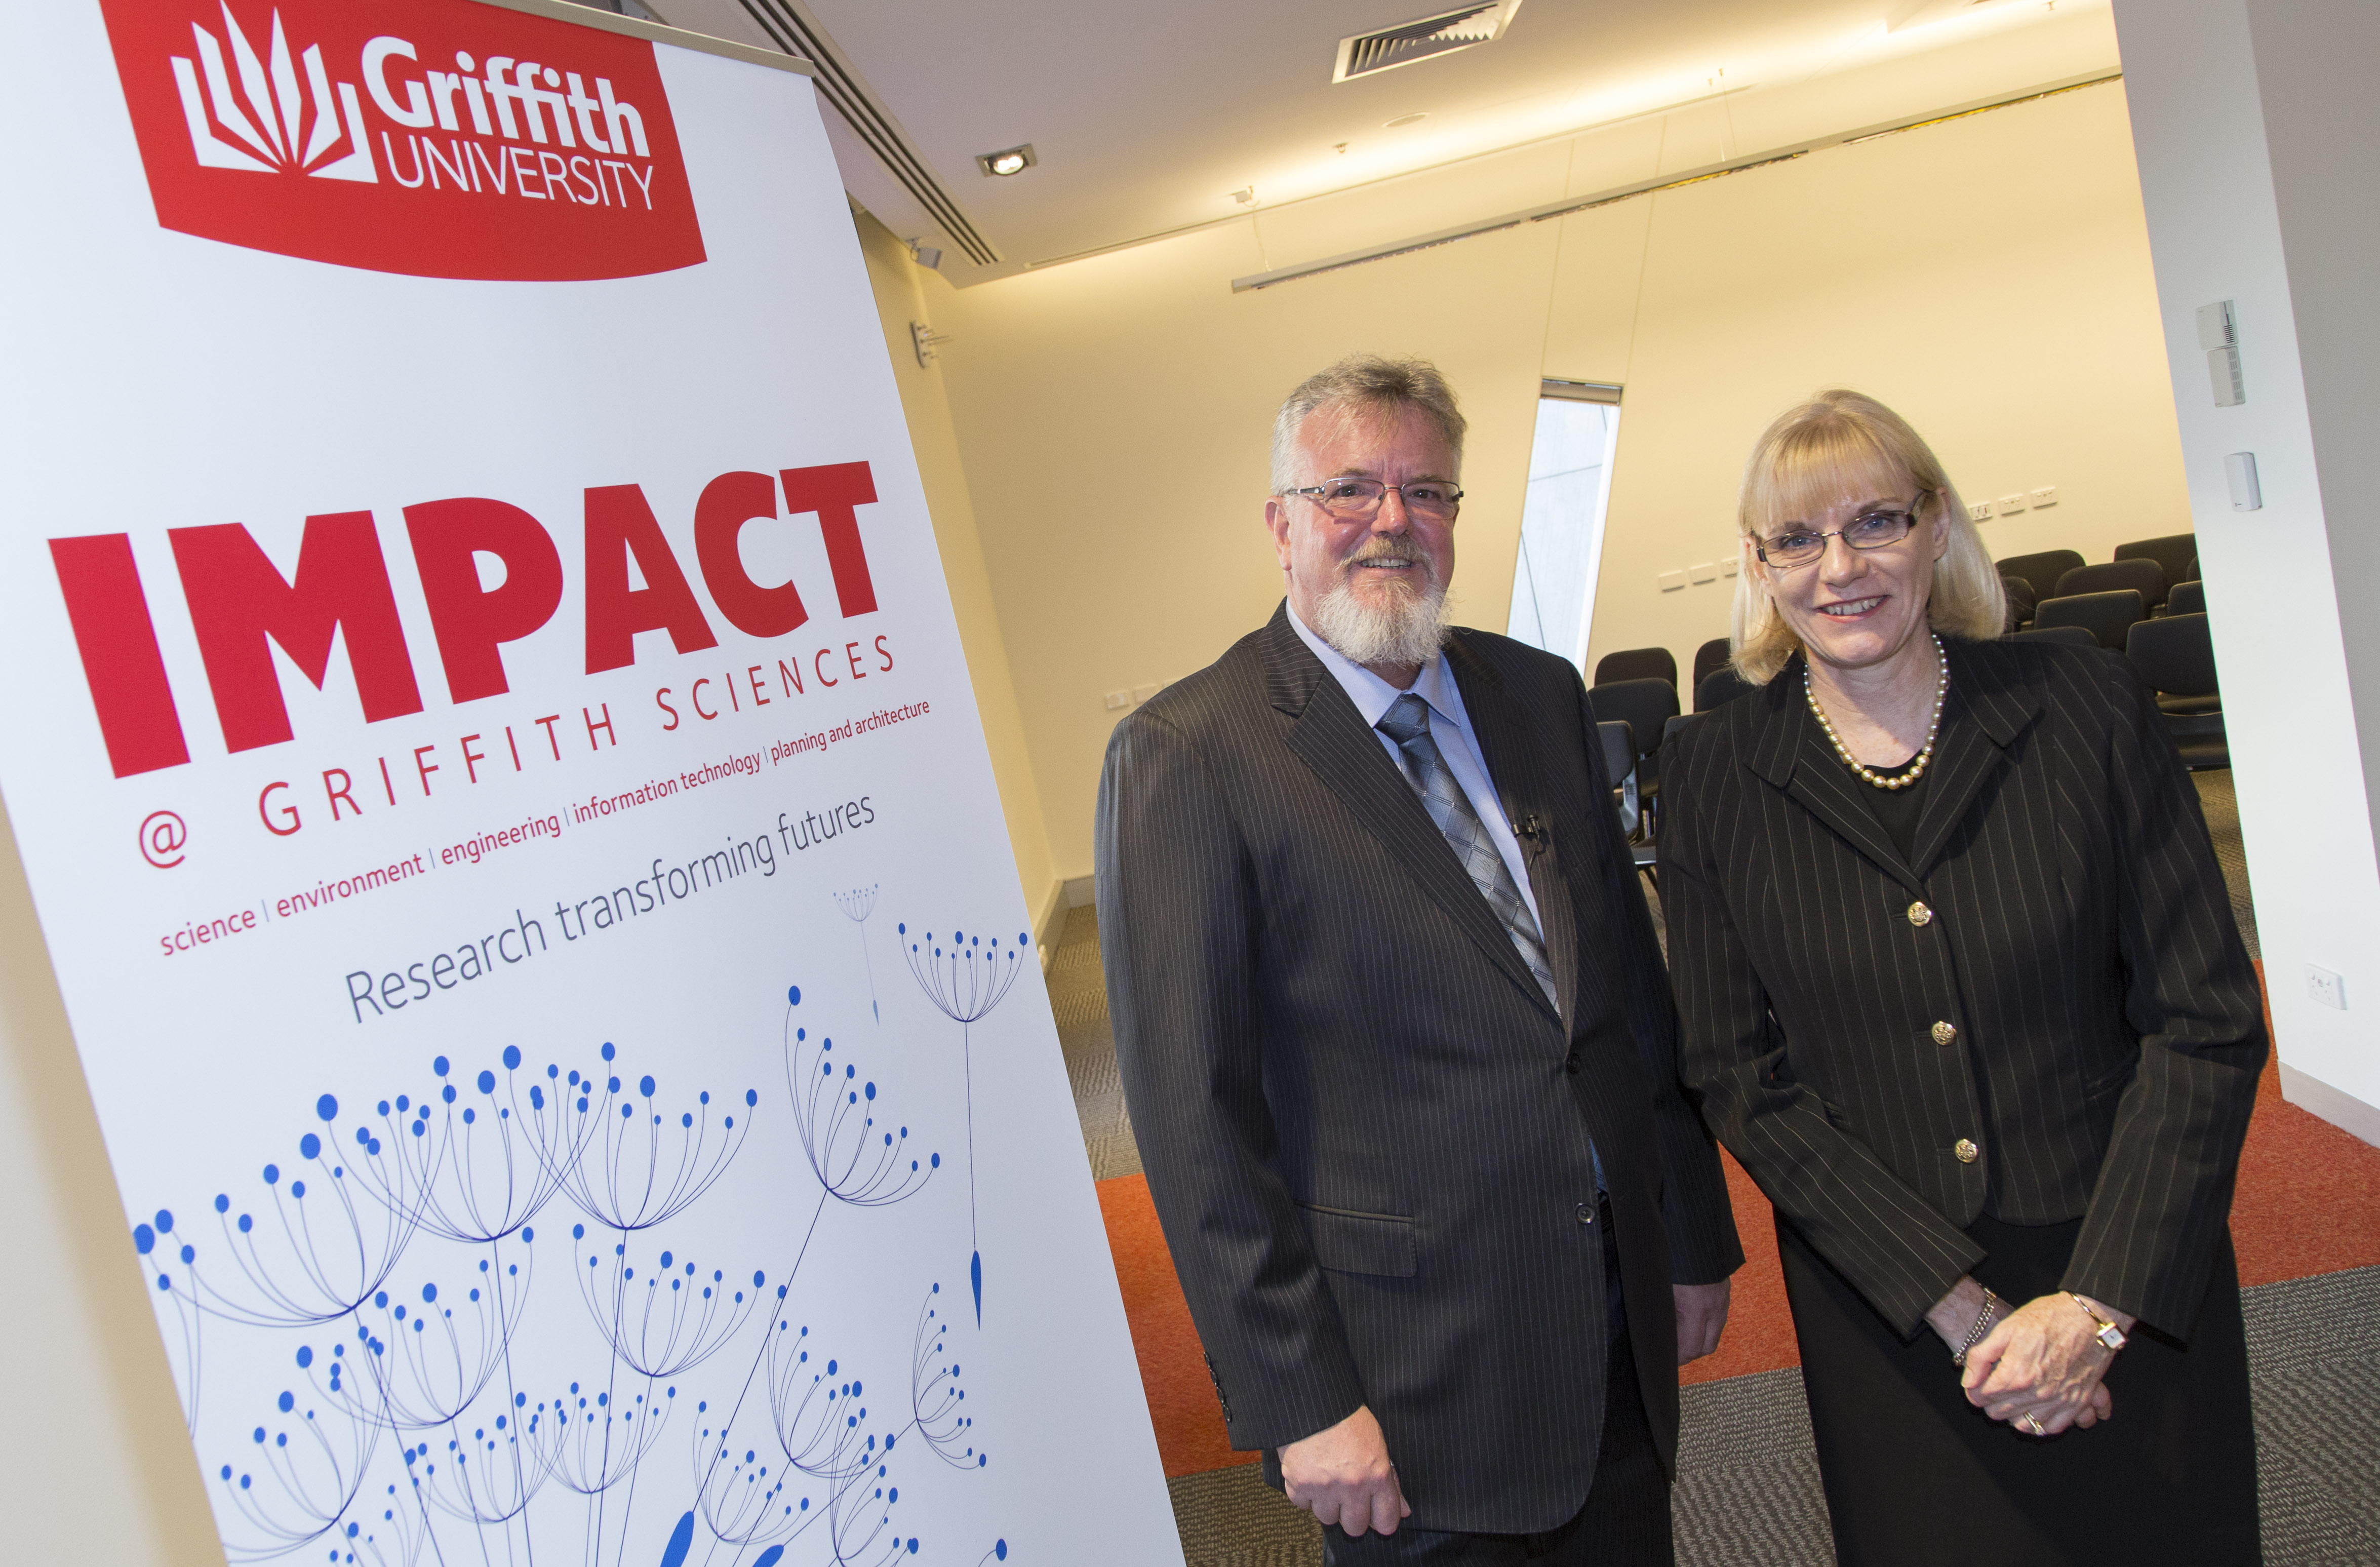 Griffith University's inaugural IMPACT@Griffith Sciences Lecture, uest speaker Prof Jon Olley, PVC of SEET Professor Debra Henly